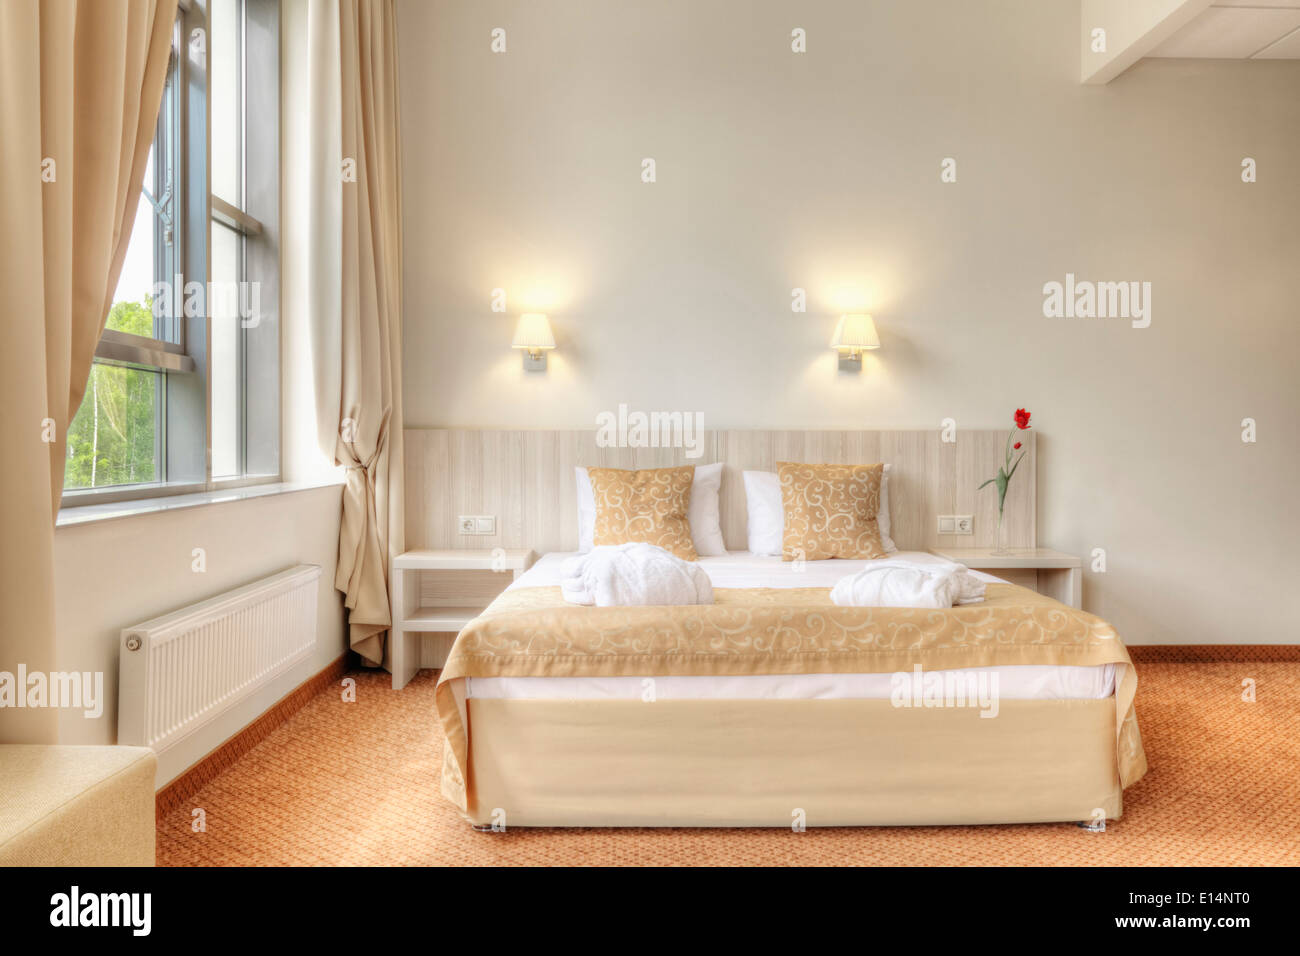 Bed and curtains in hotel room Stock Photo